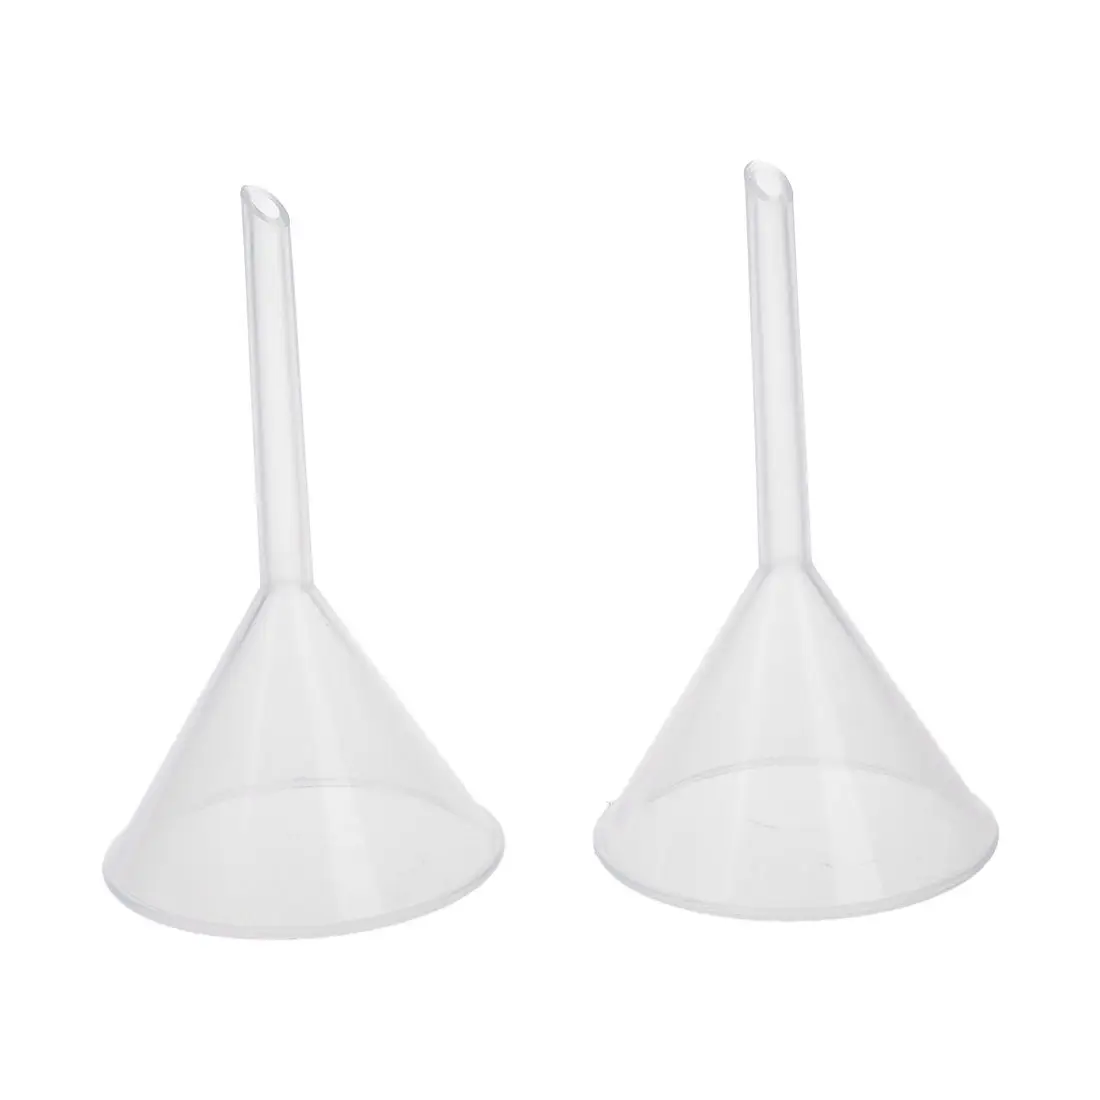 

2 Pcs 60 ml 2 5/9" Mouth Dia Laboratory Clear White Plastic Filter Funnel